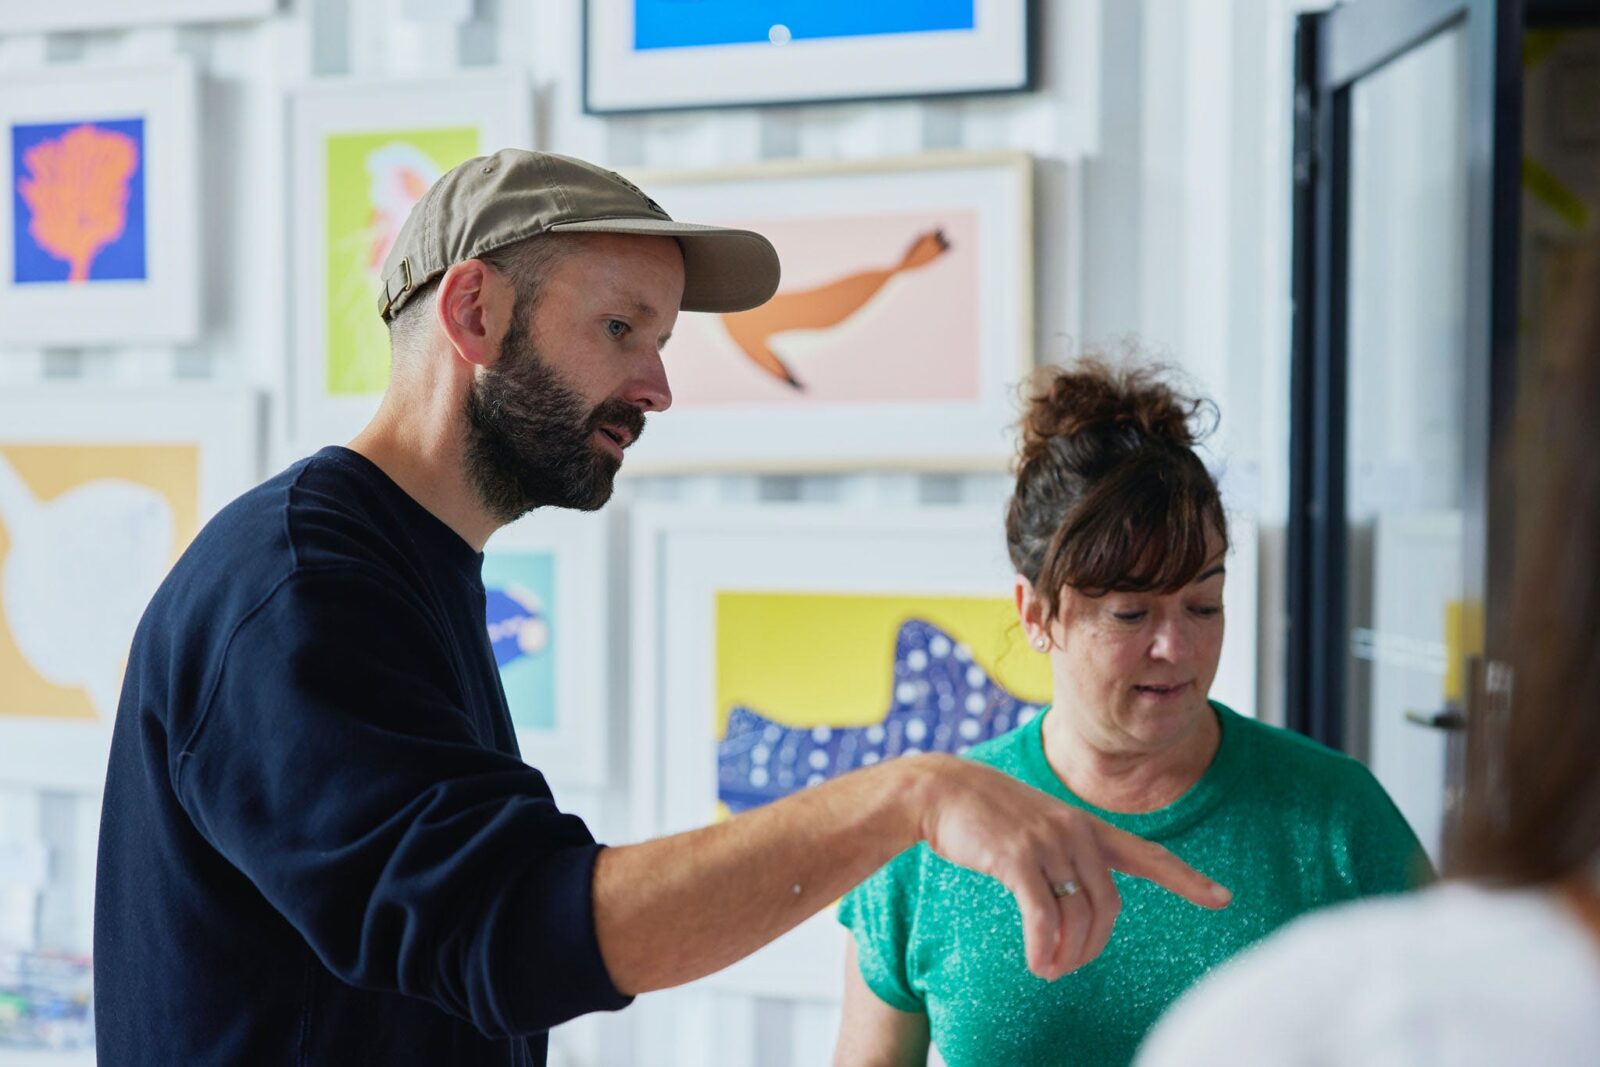 Man with beard in cap showing a woman his artwork